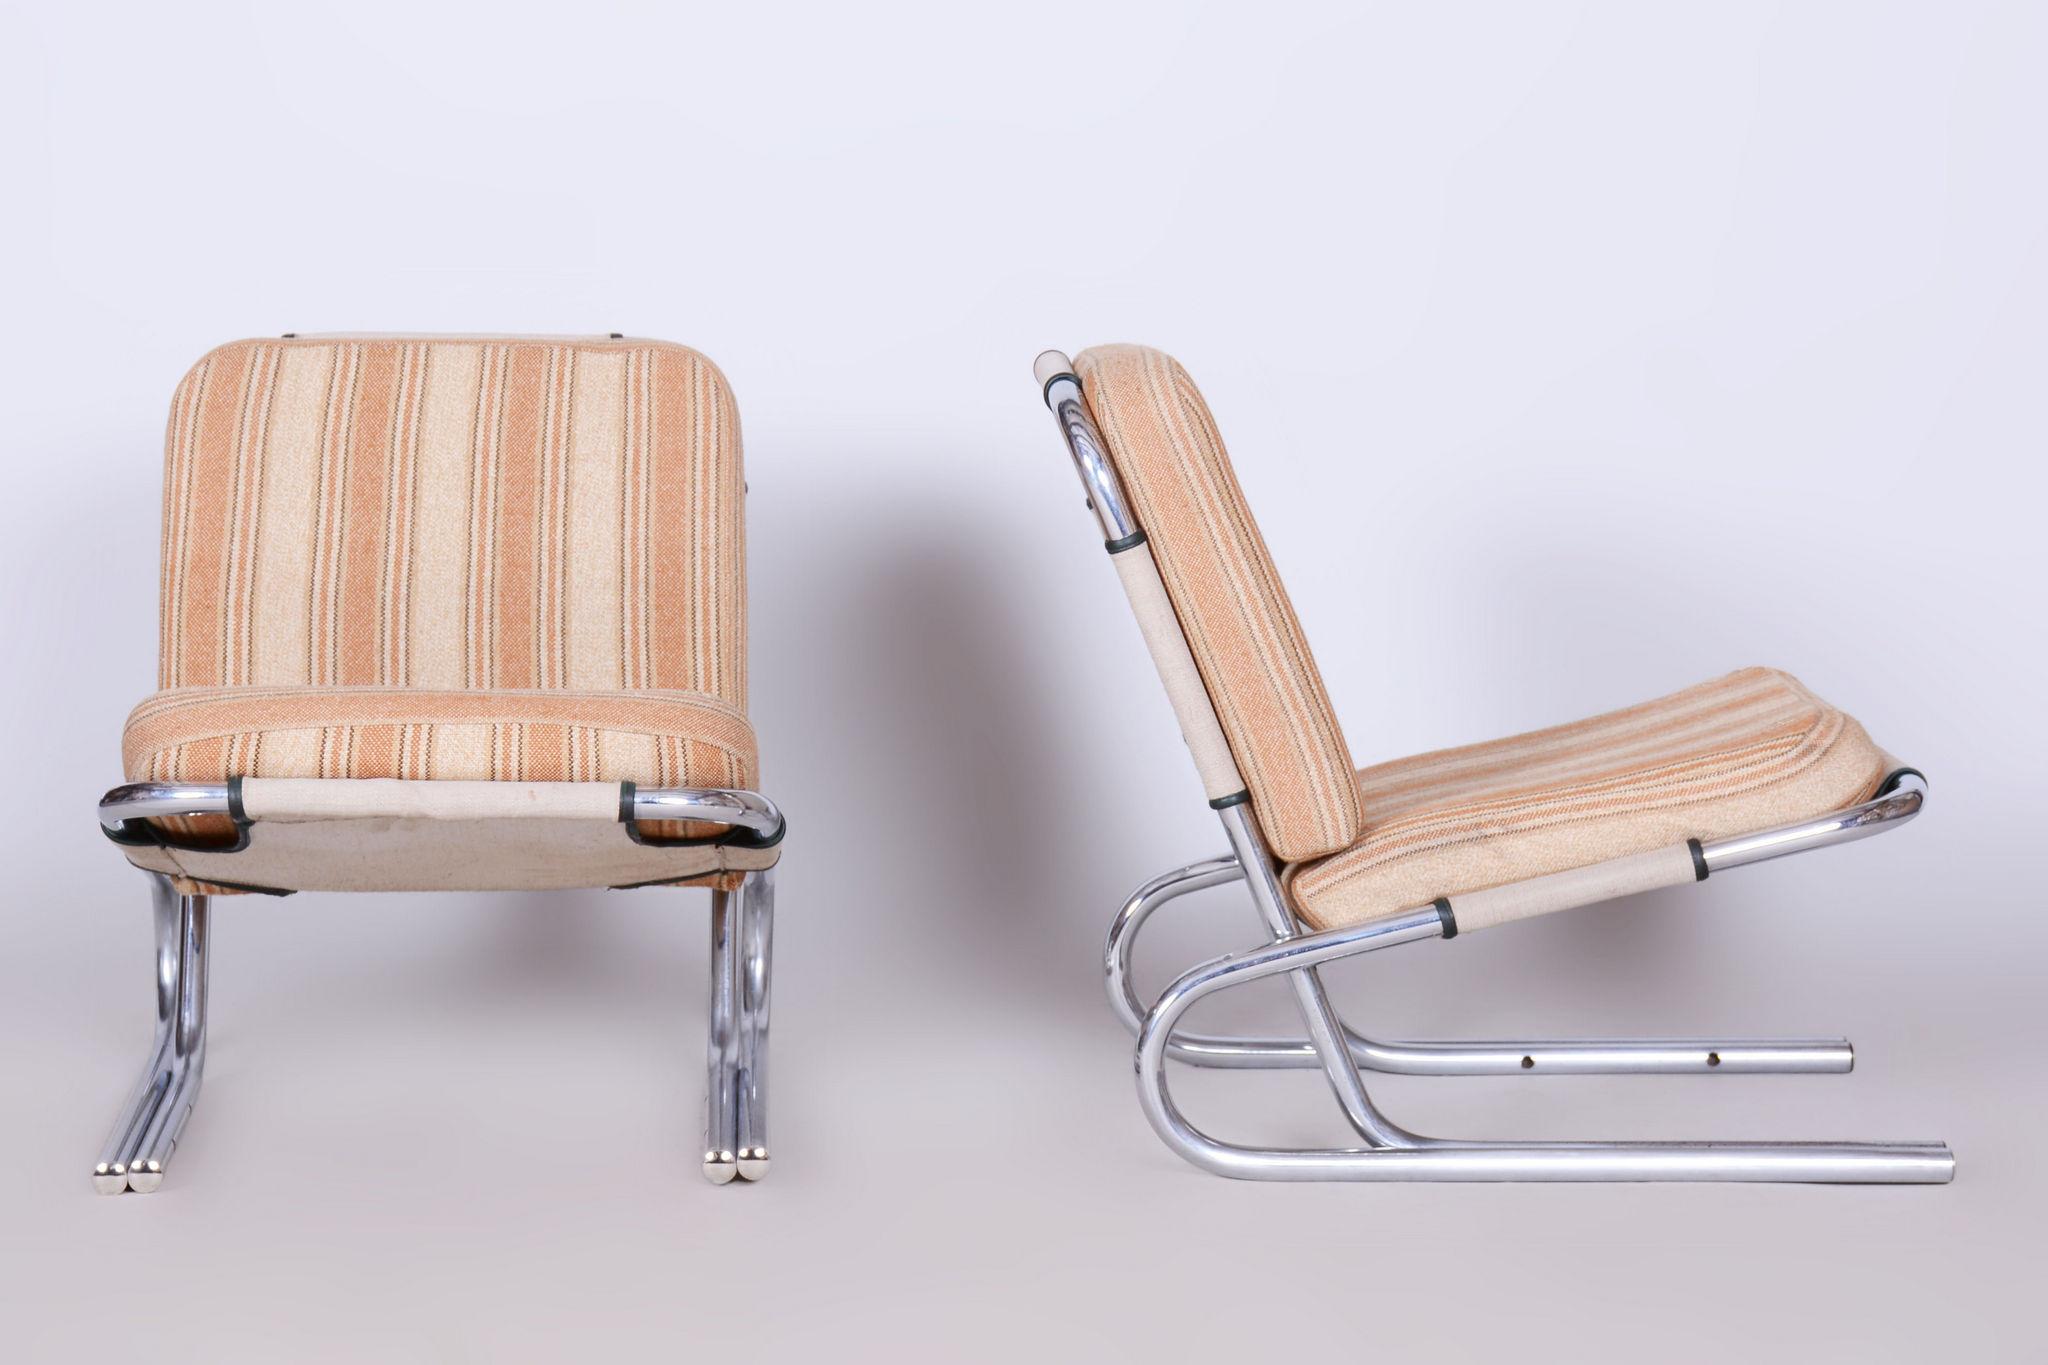 Set of Two Original Bauhaus Armchairs, Chrome-Plated Steel, Germany, 1940s For Sale 2